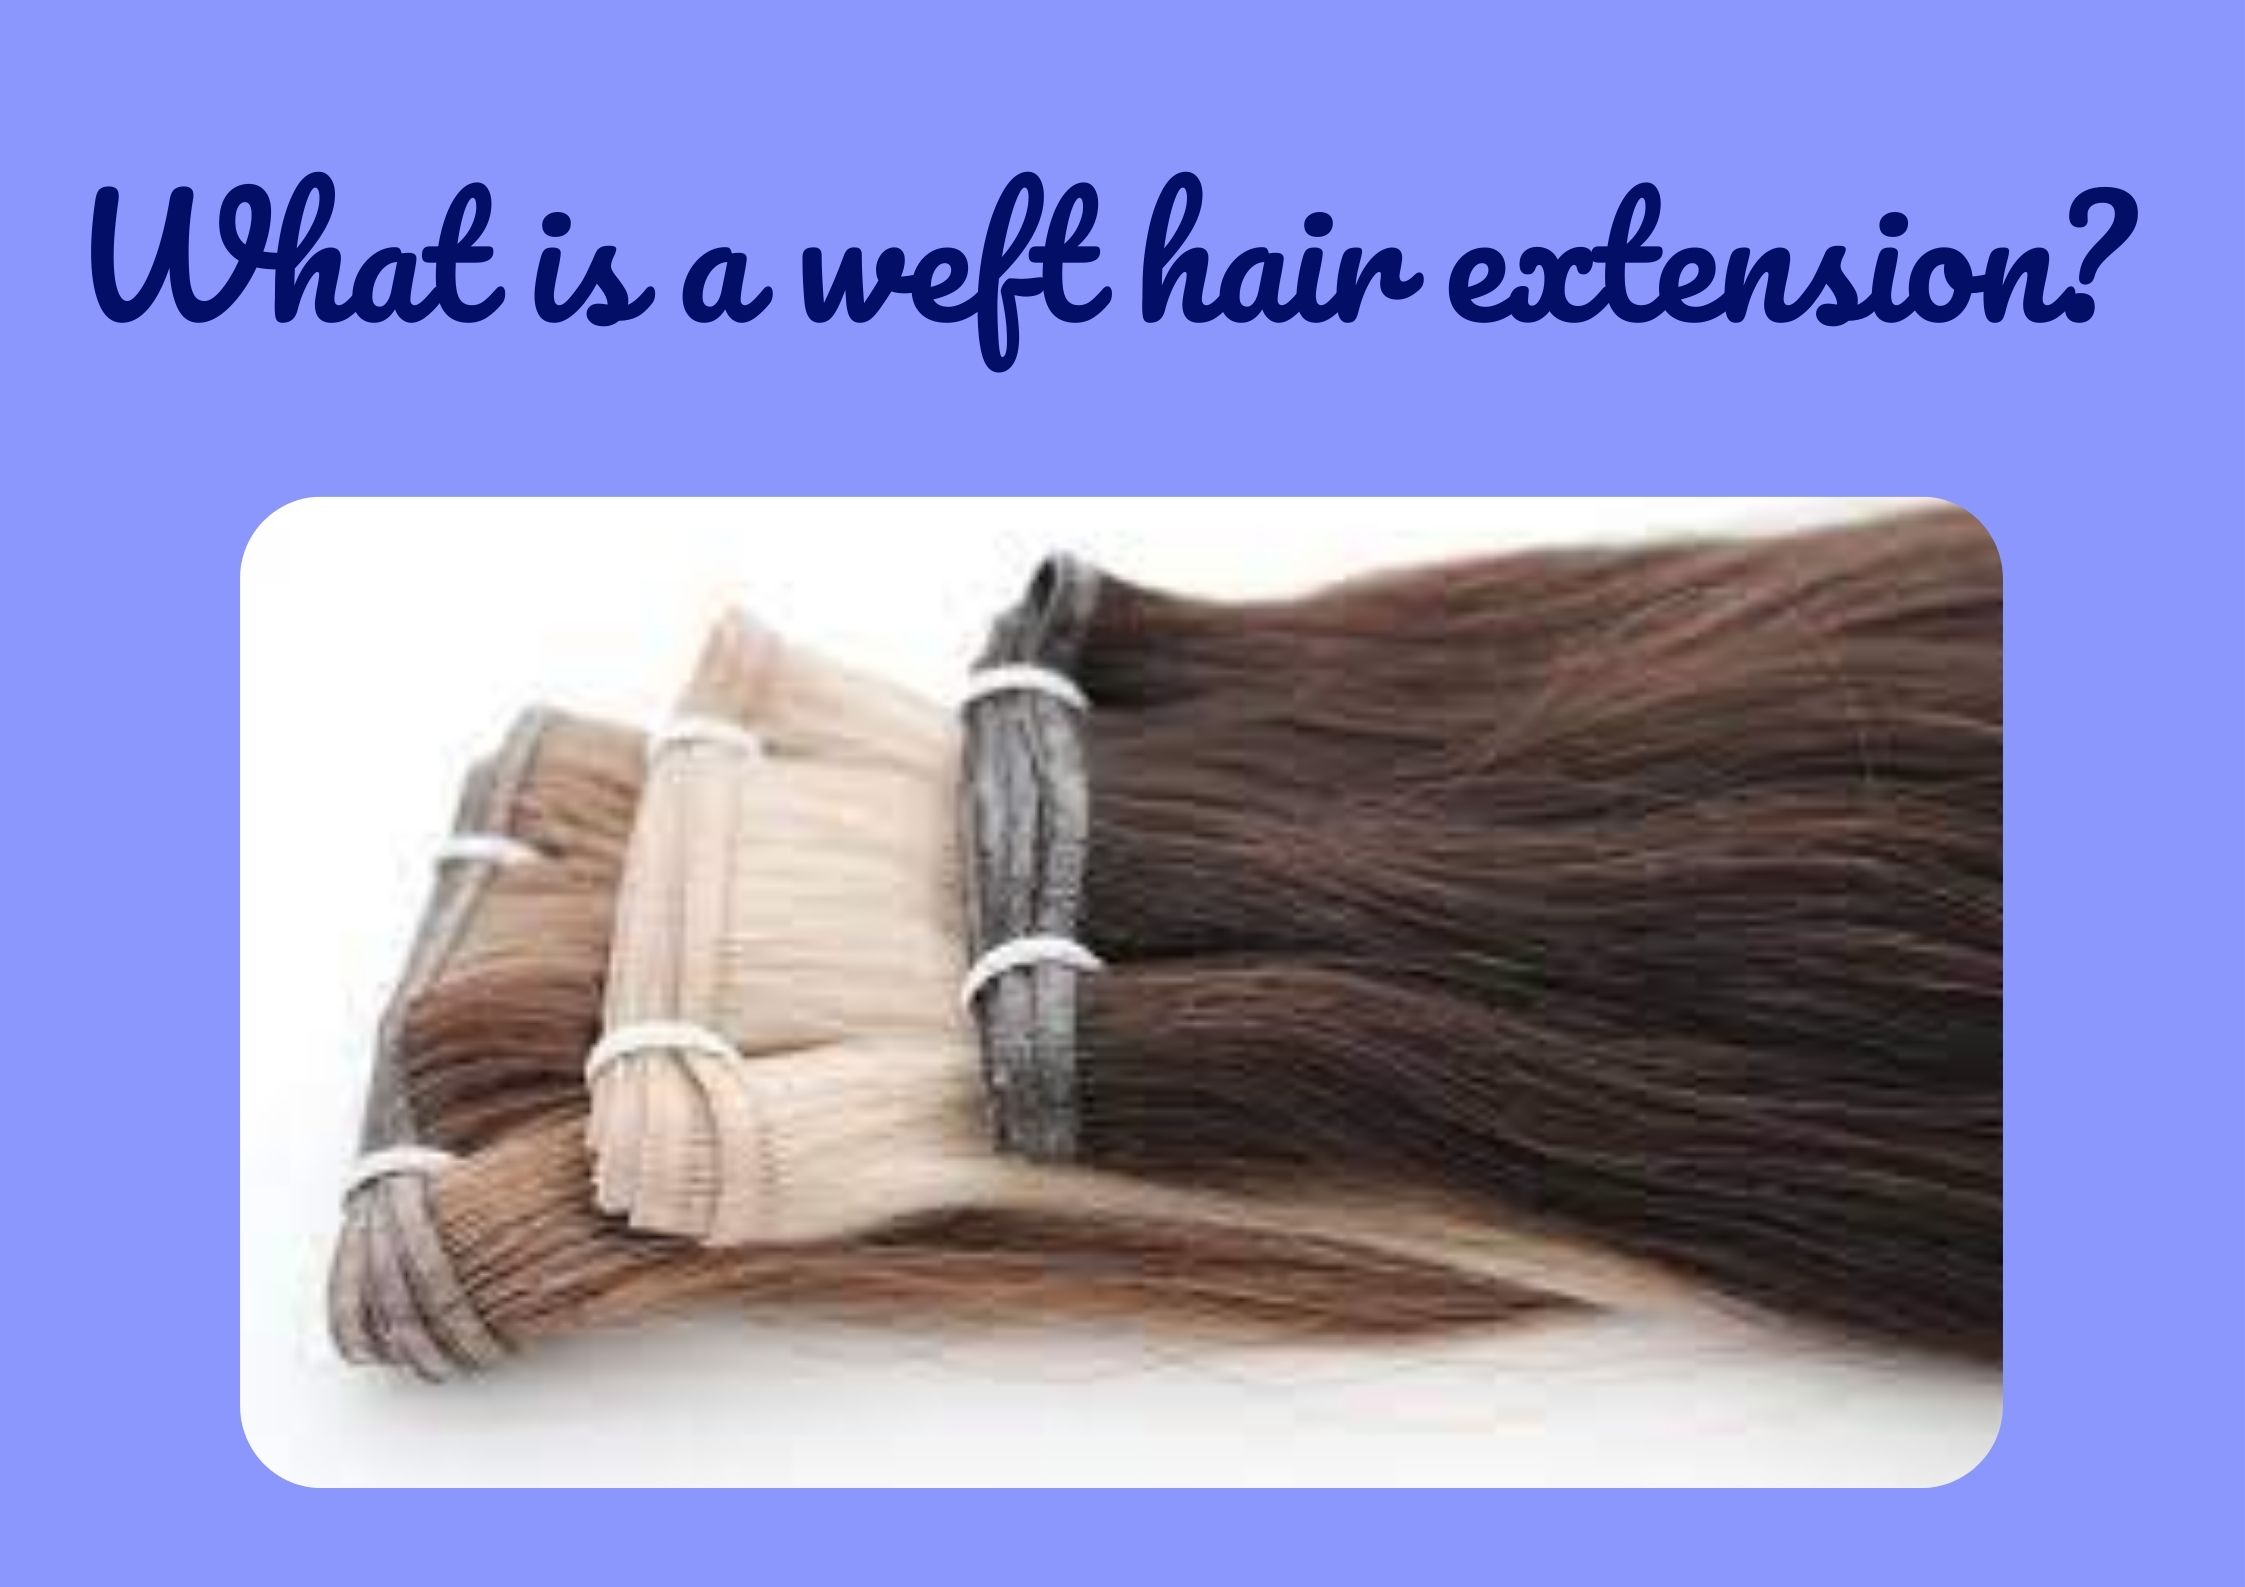 weft-hair-extensions-the-new-trend-of-the-hair-industry5